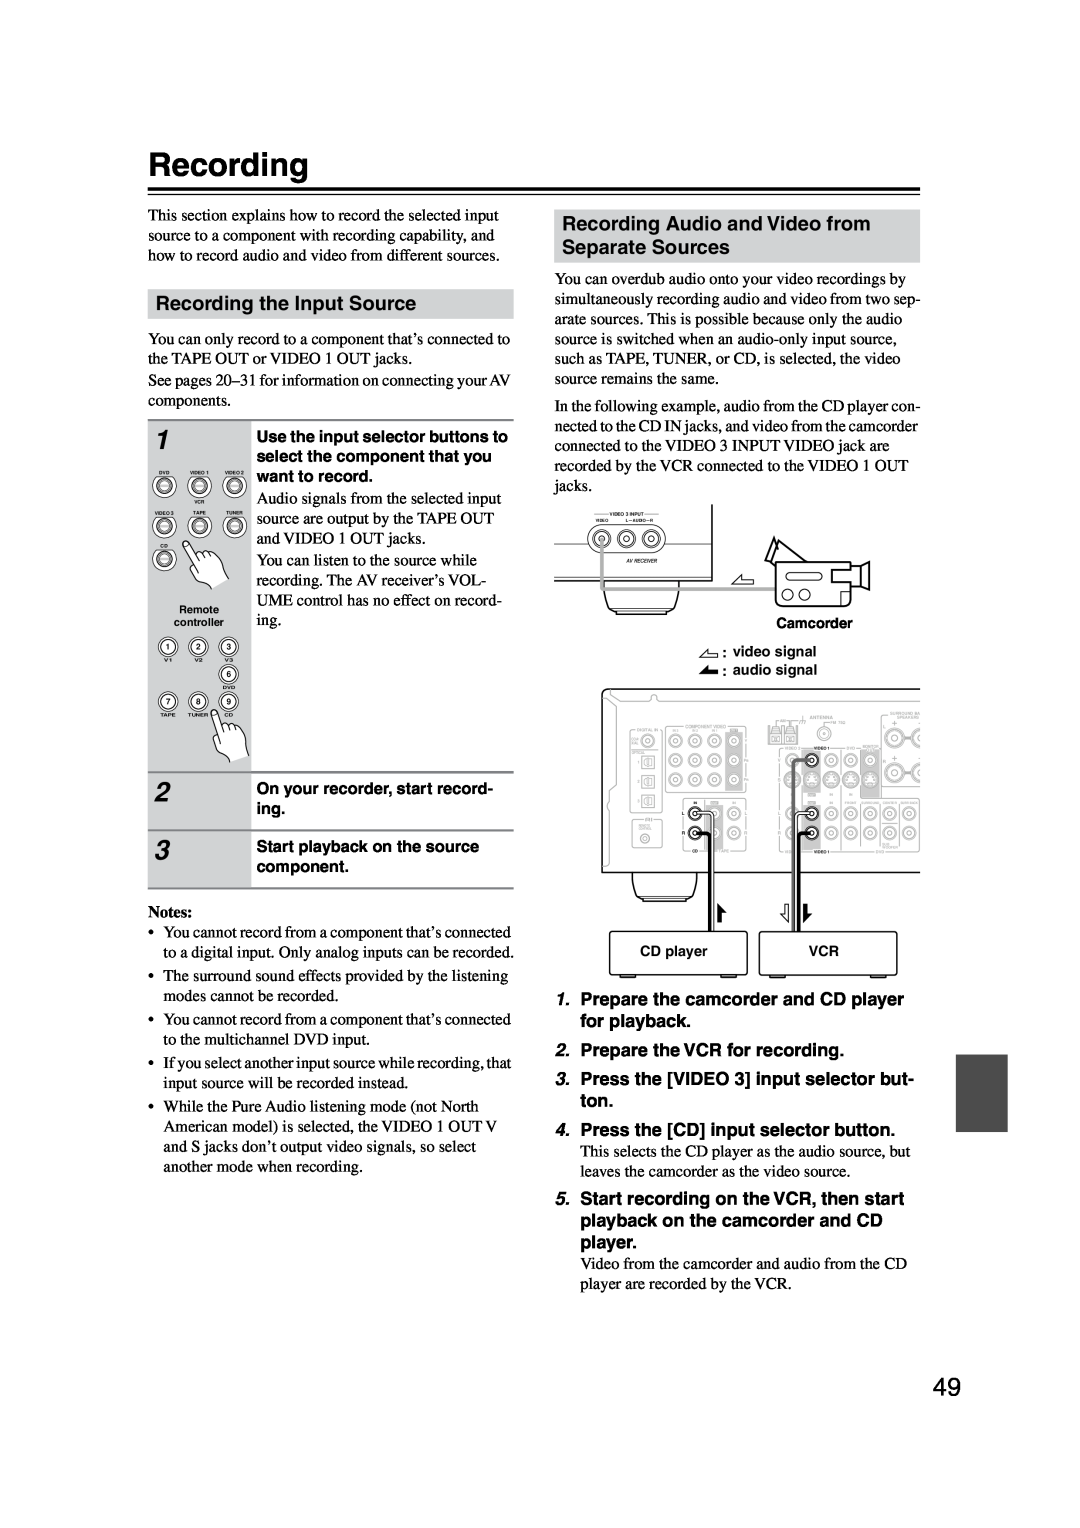 Onkyo TX-SR574 instruction manual Recording the Input Source, Recording Audio and Video from Separate Sources 